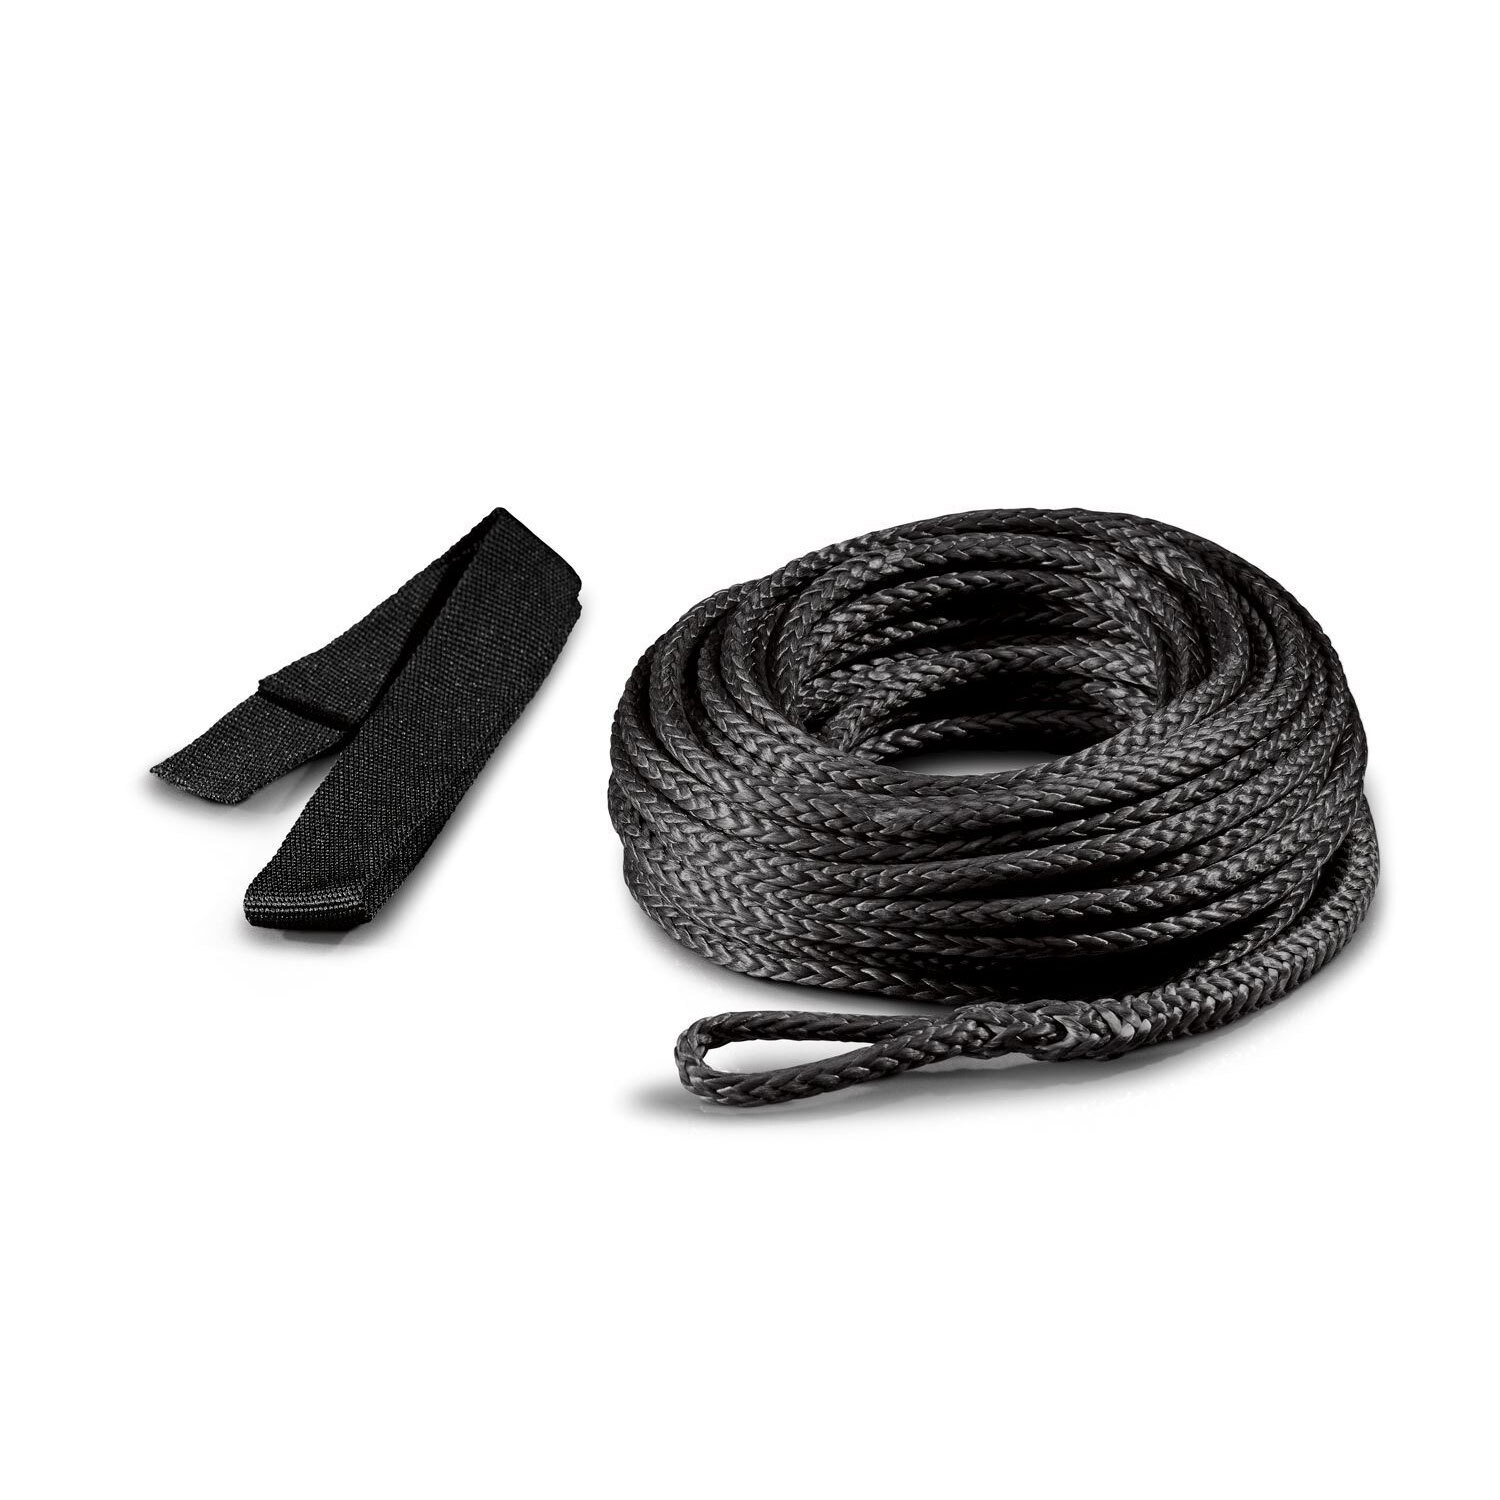 WARN® 2500/3500 lb Synthetic Rope